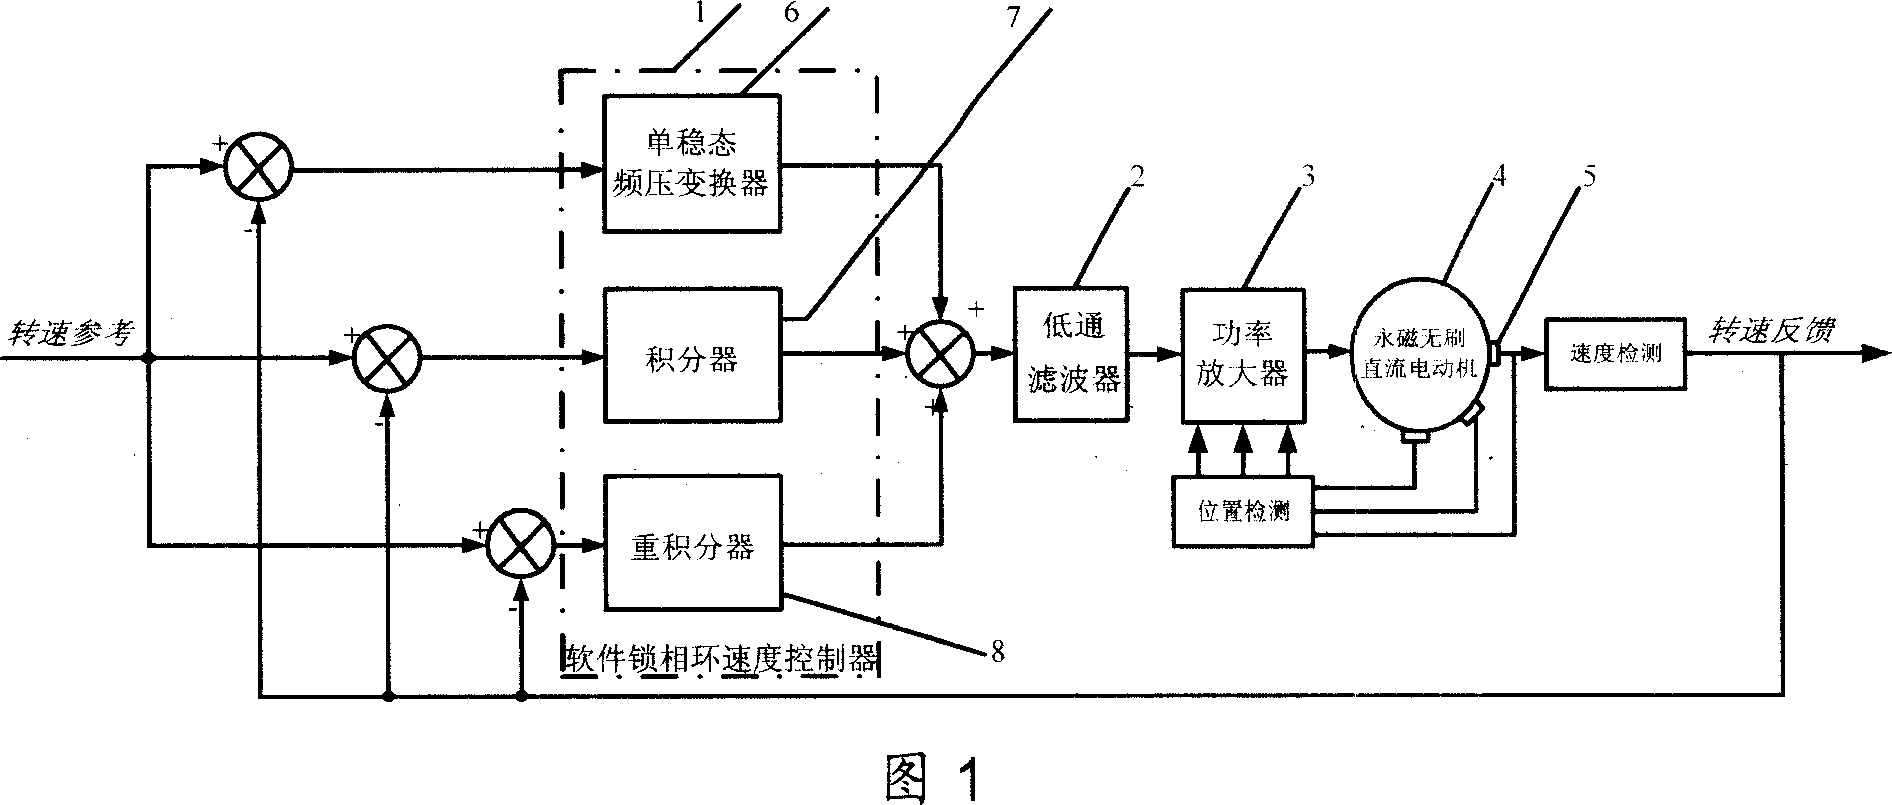 A phase-lock steady speed control system of high speed permanent-magnetic brushless DC motor